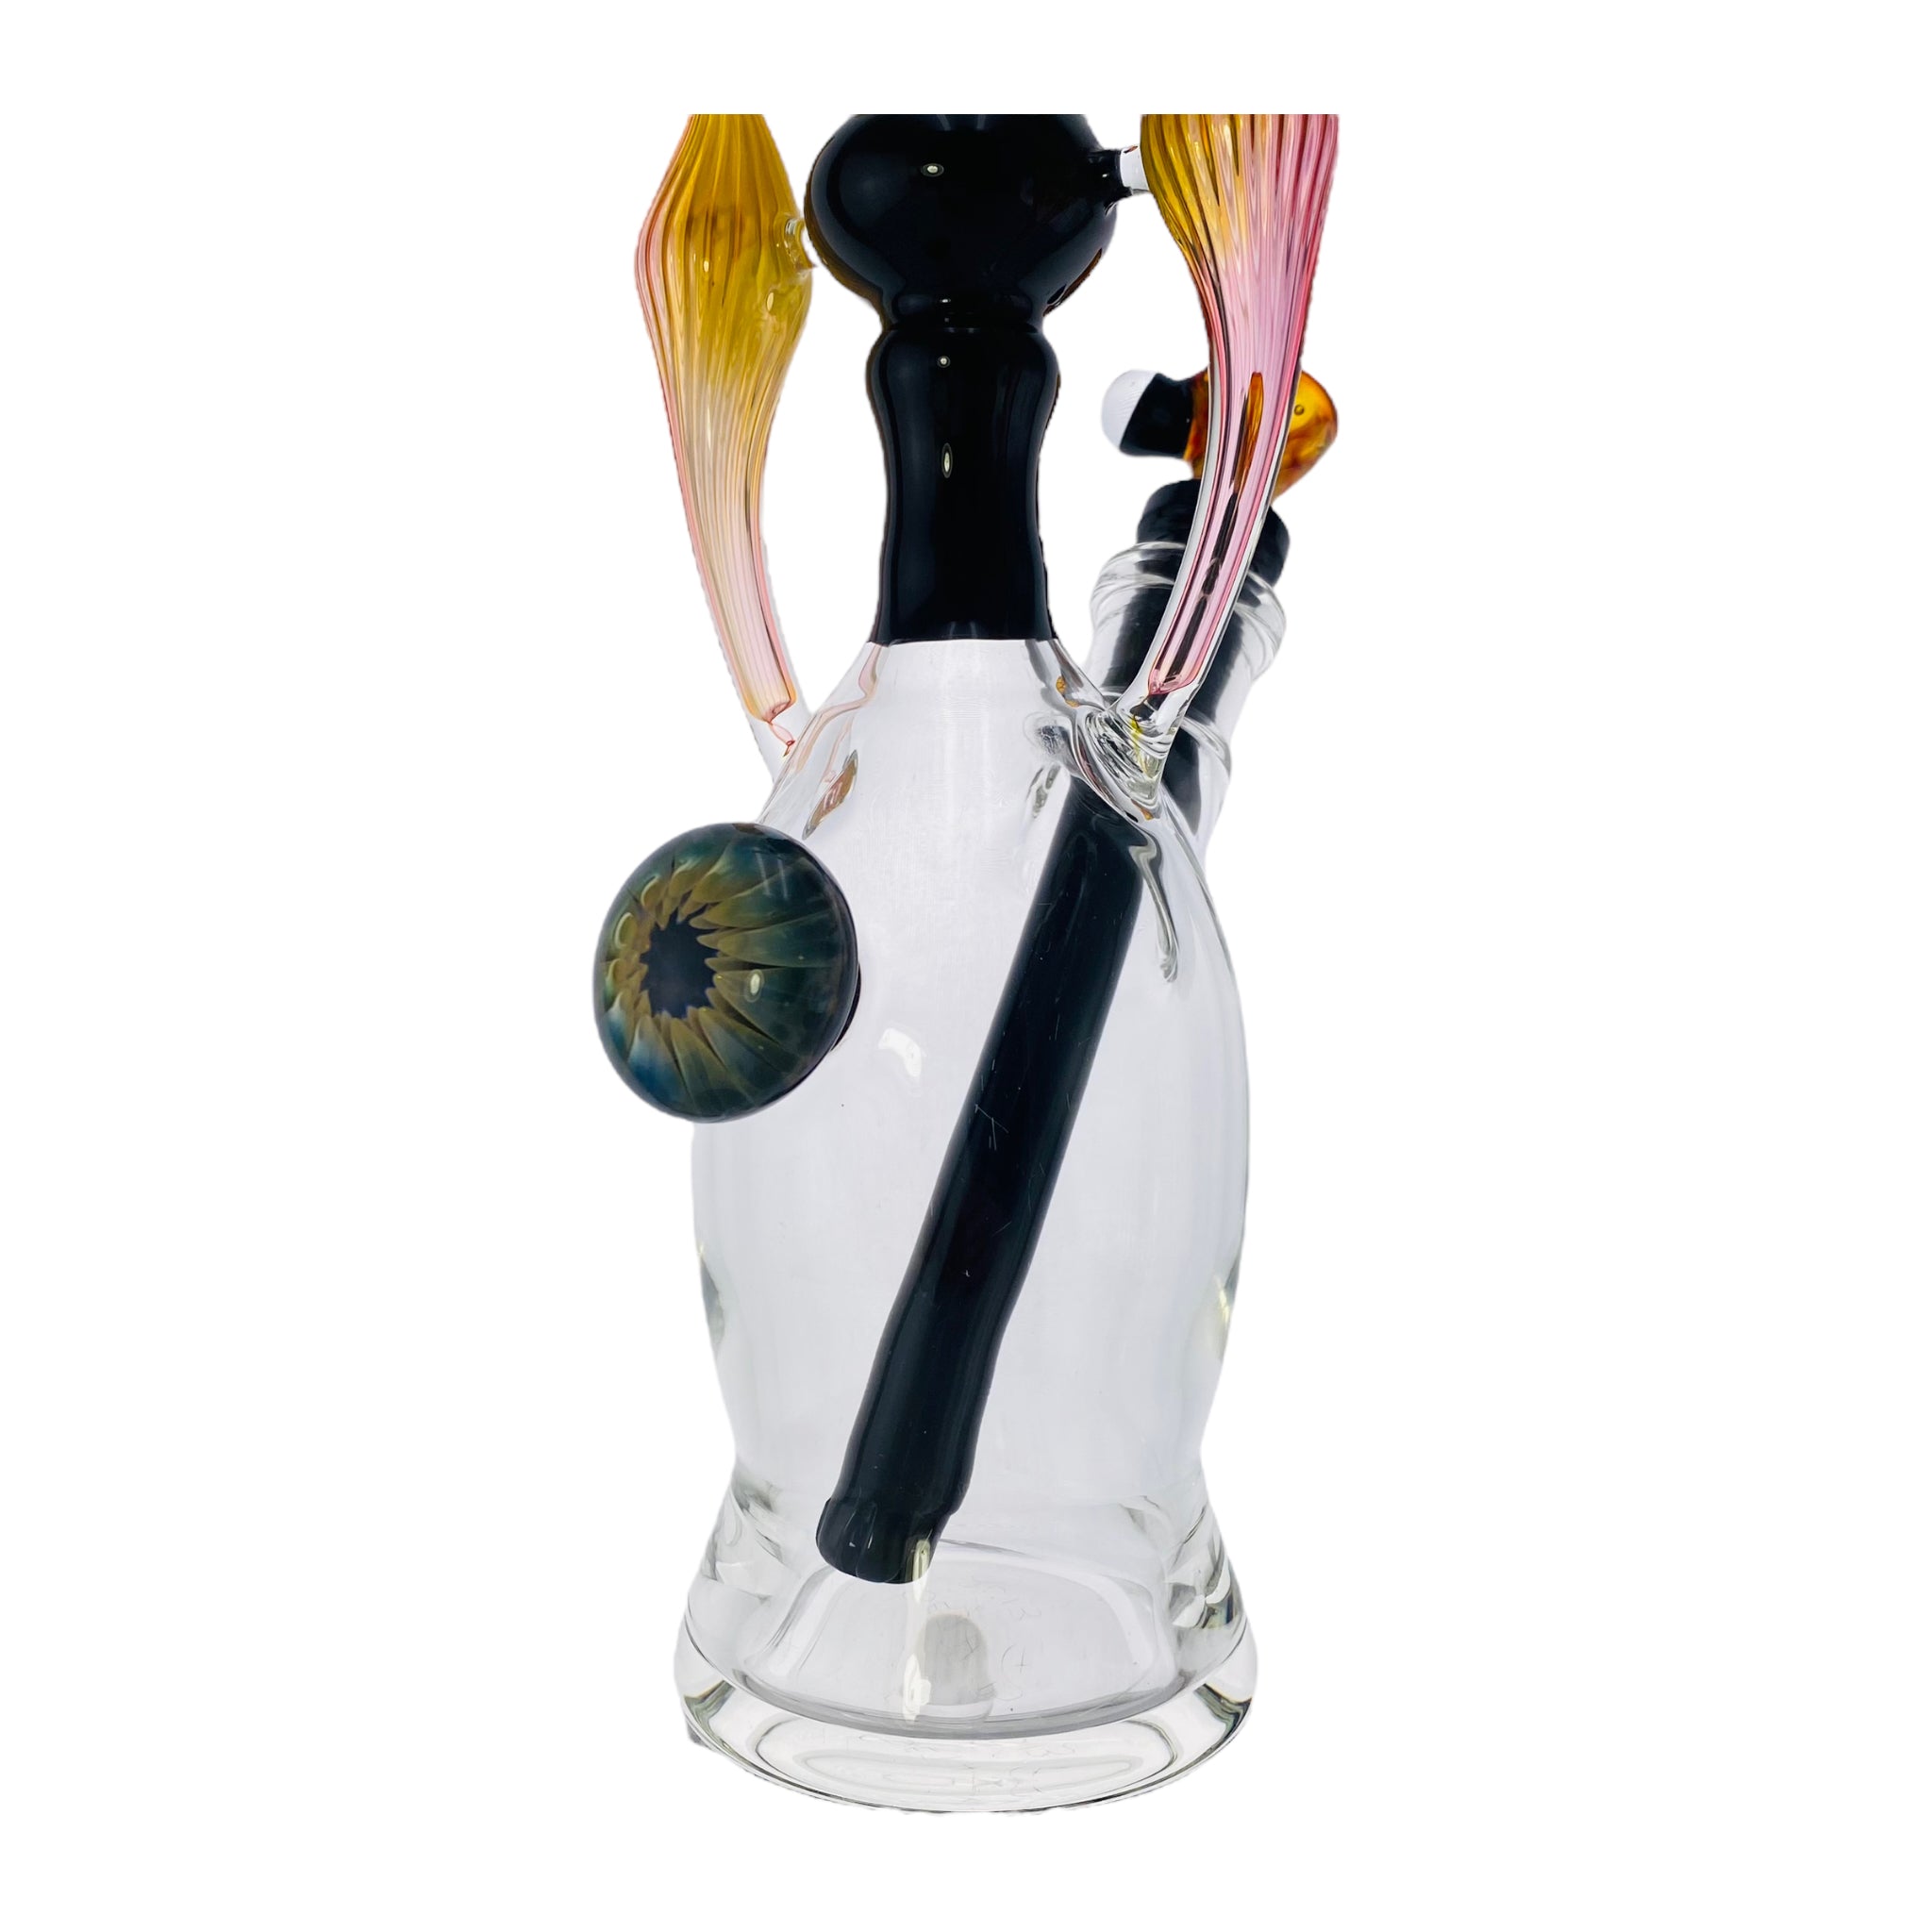 This 14-inch black and gold fume bong is a collaboration between Seth B Glass and US Tubes, combining superior craftsmanship with a stunning aesthetic. Fumed with real gold and featuring black US Tubes downstem